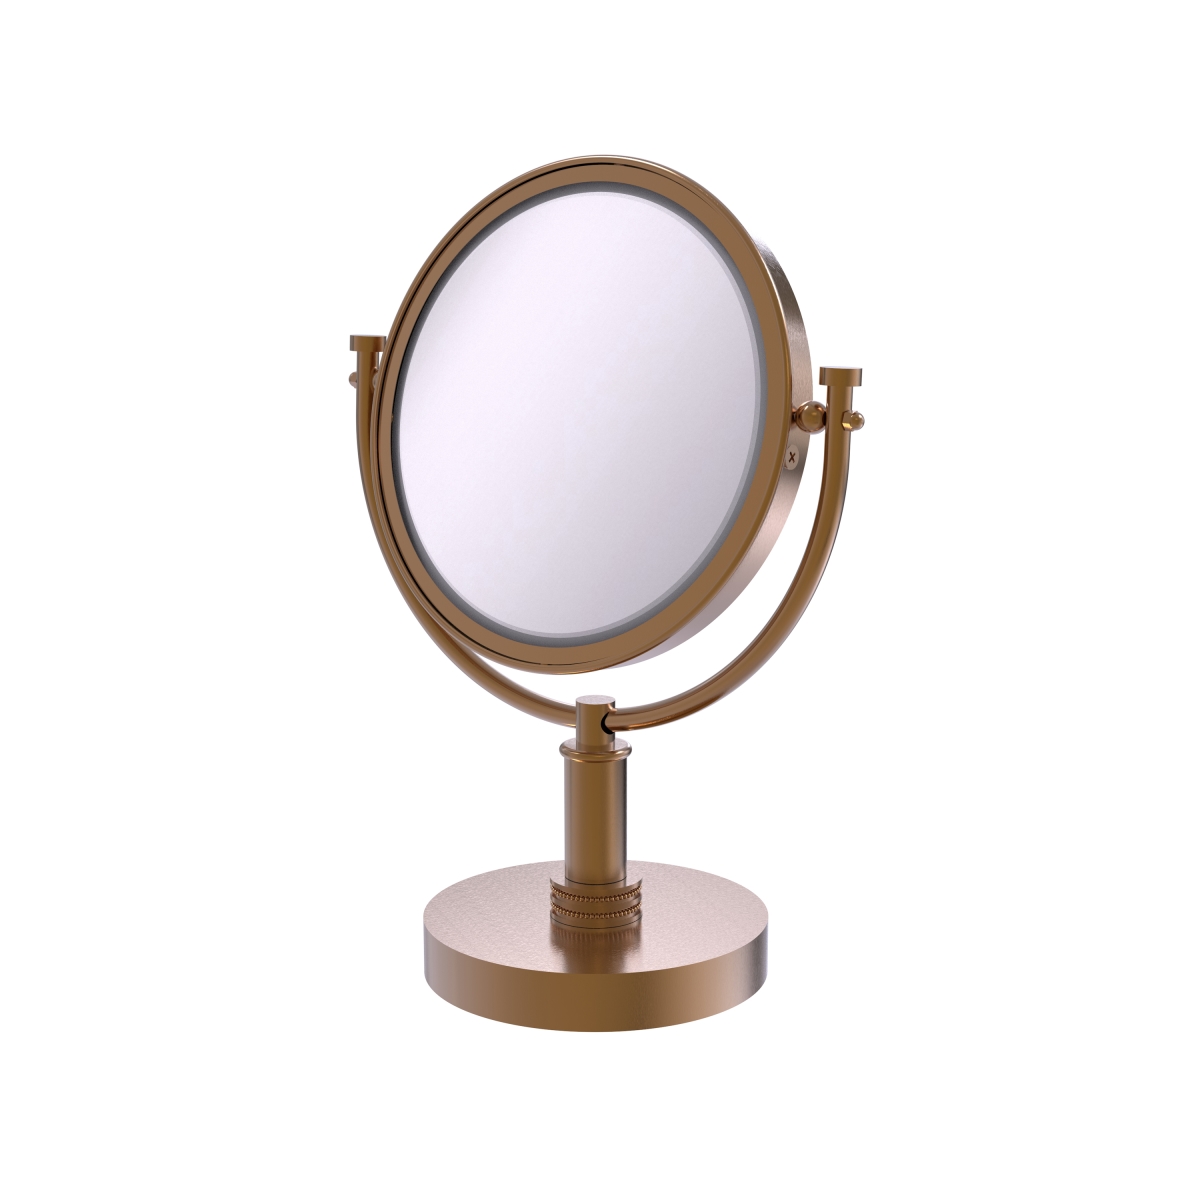 Dm-4d-4x-bbr Dotted Ring Style 8 In. Vanity Top Make-up Mirror 4x Magnification, Brushed Bronze